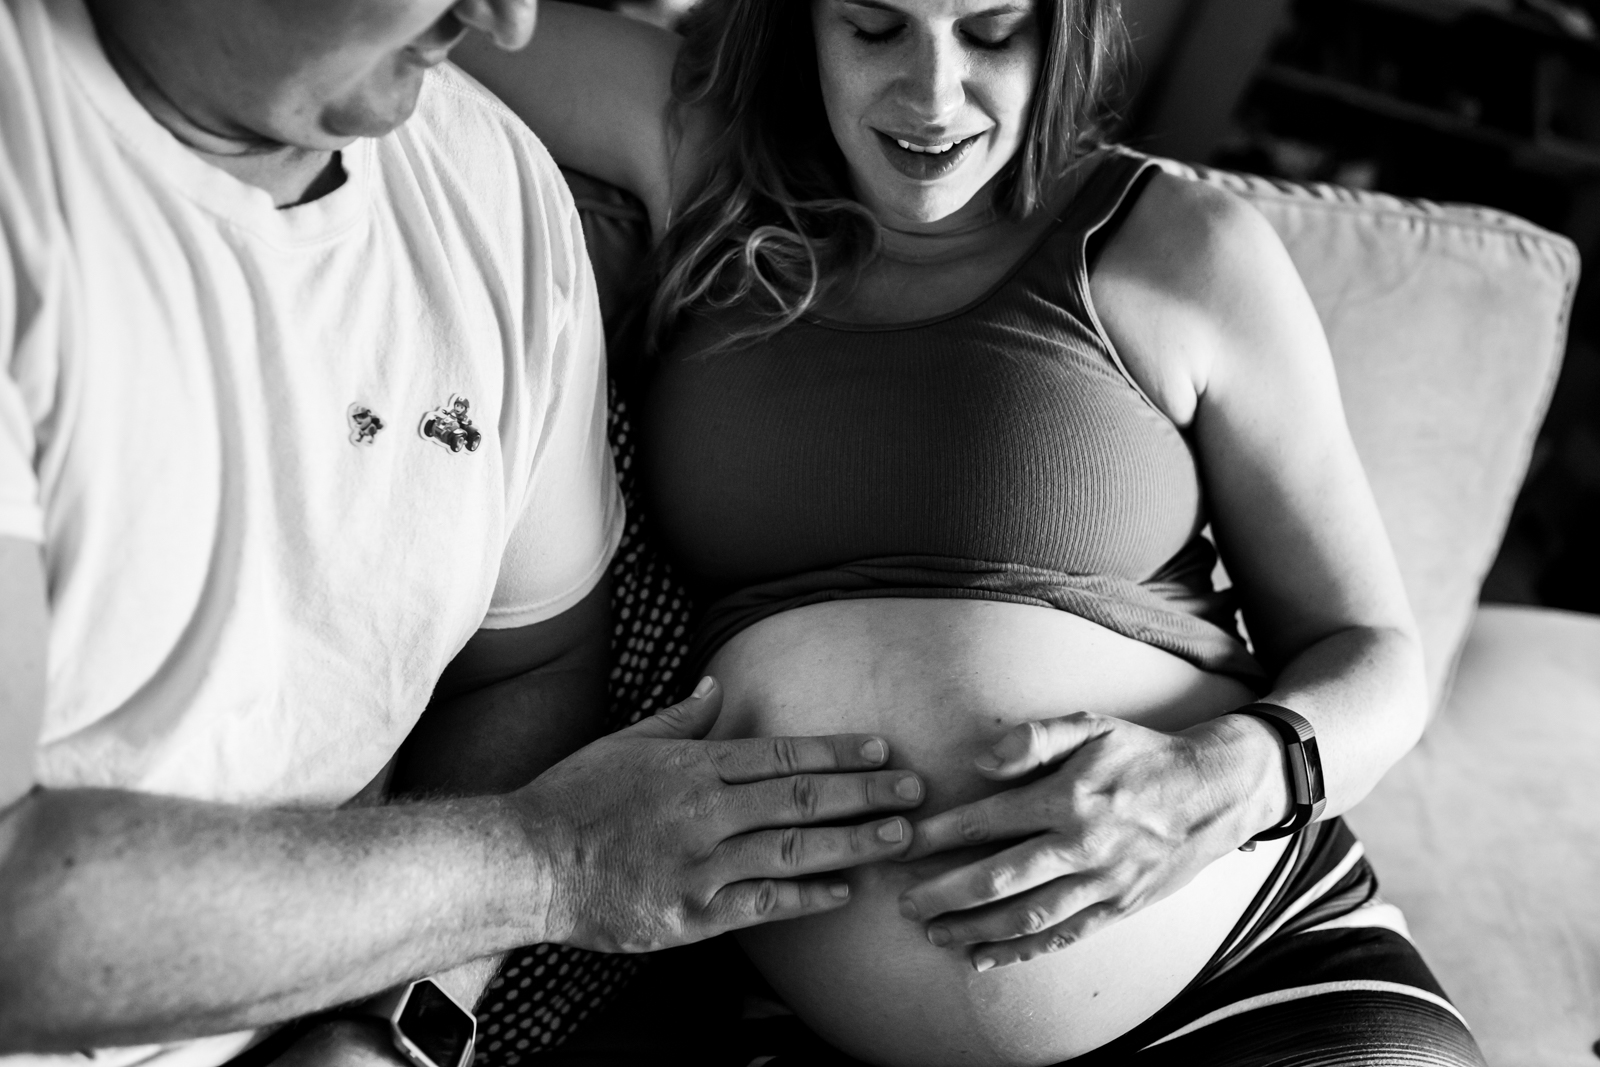 Lawren Rose Photography takes a photo of a husband and pregnant wife sitting on a couch admiring her pregnant belly